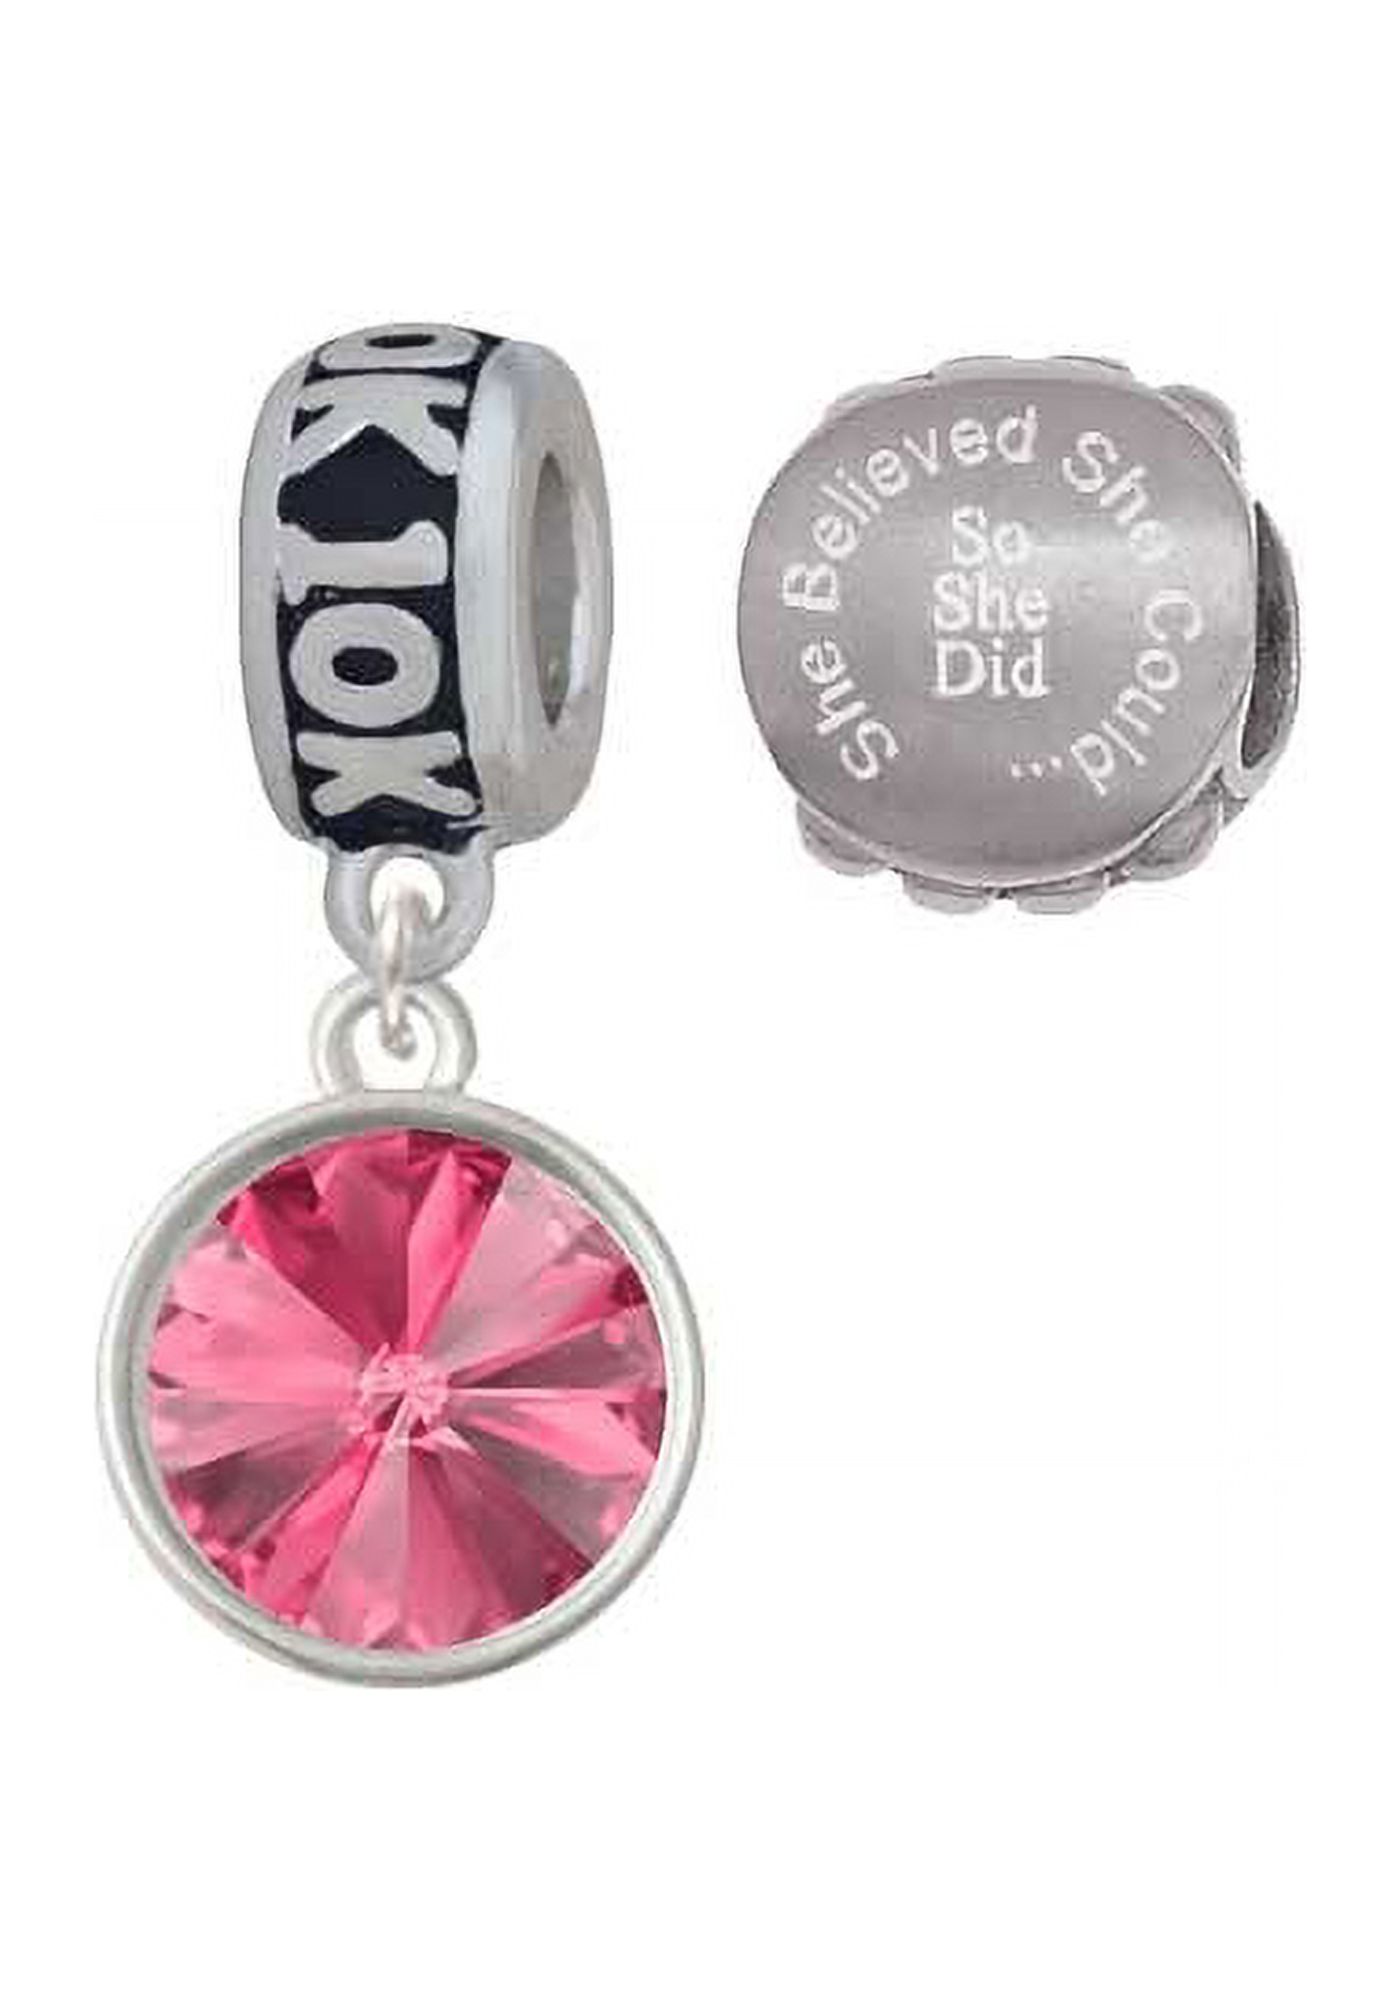 12mm Crystal Rivoli - Hot Pink 10K Run She Believed She Could Charm Beads (Set of 2) - image 1 of 1